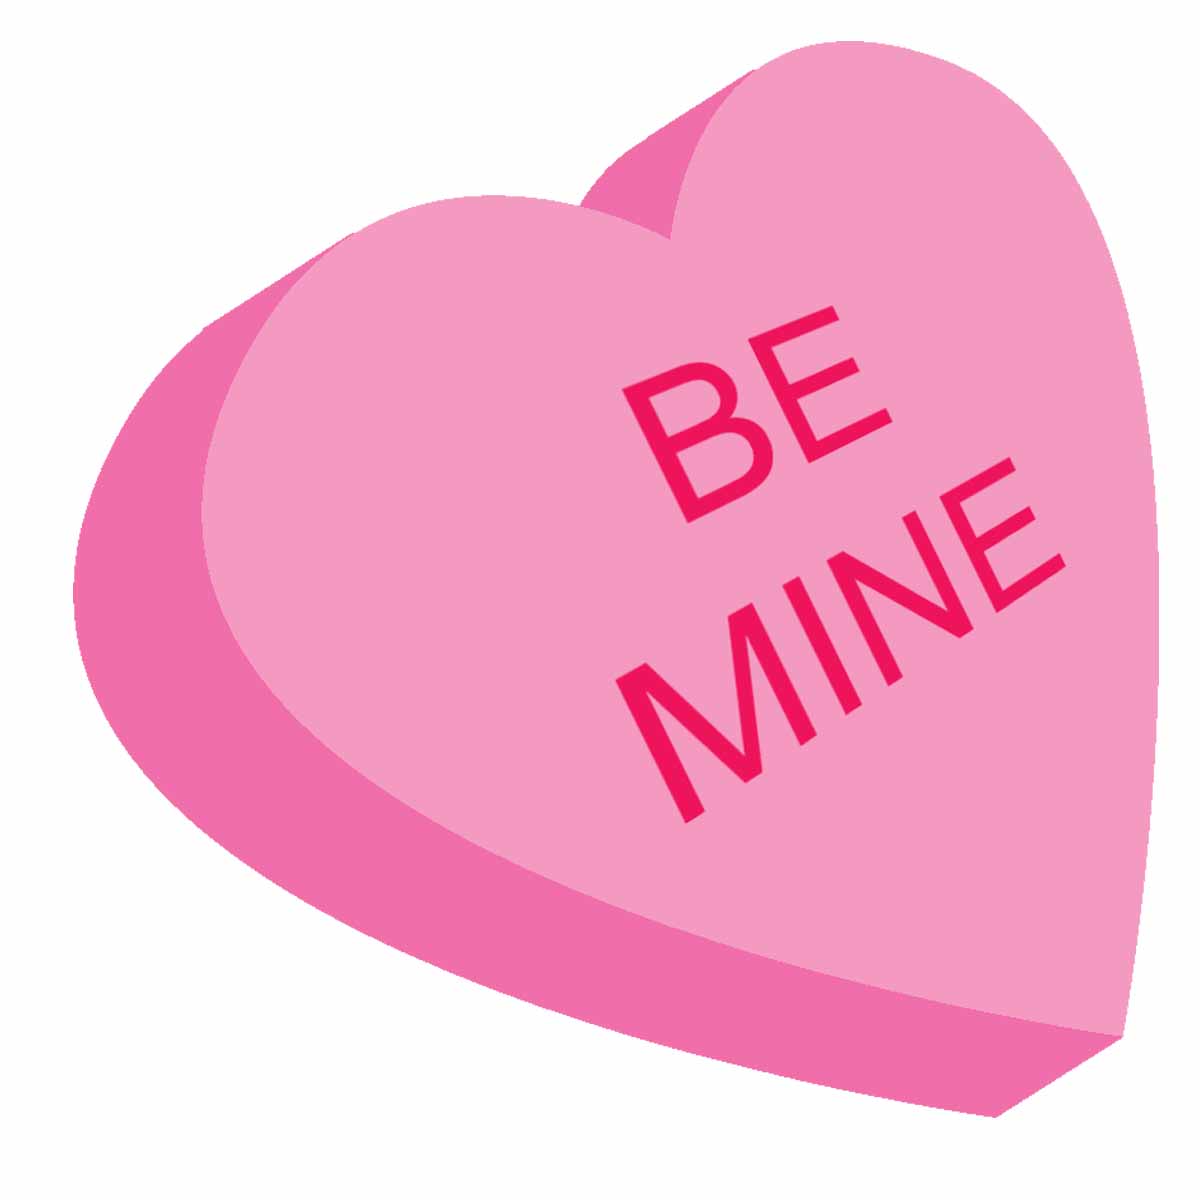 Candy hearts clipart.